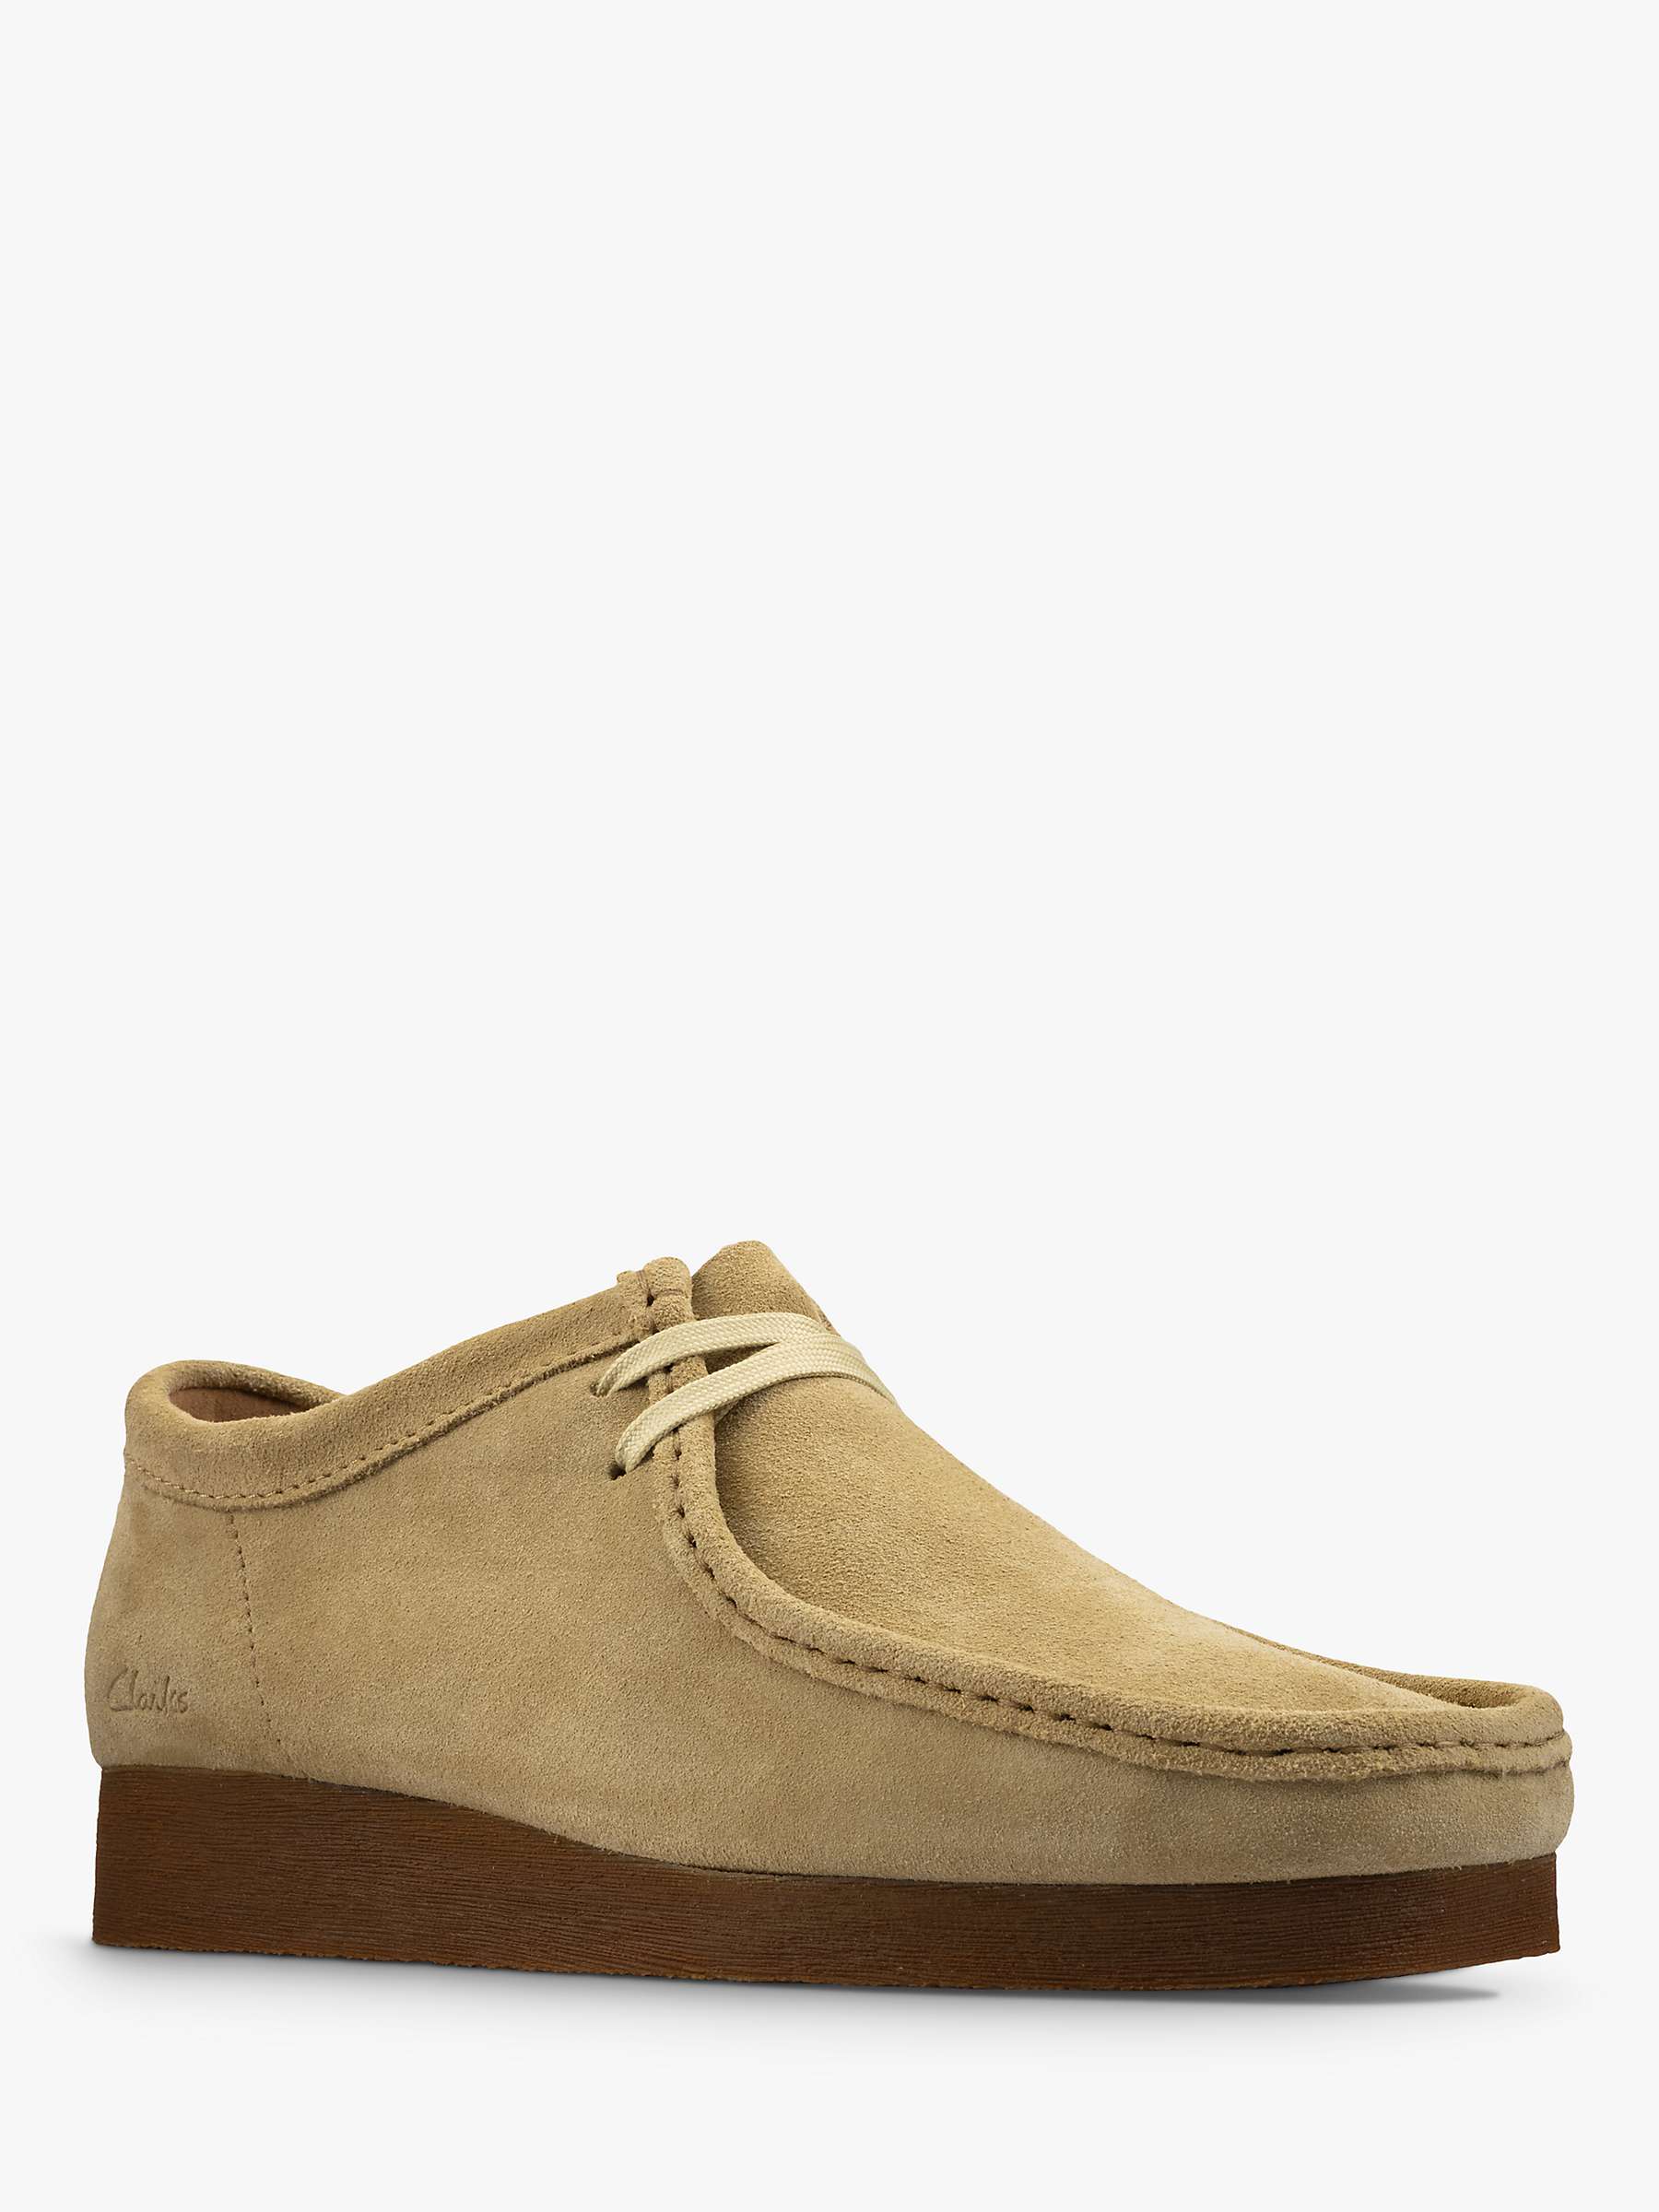 Clarks Originals Suede Wallabee 2 Shoes, Maple at John Lewis & Partners